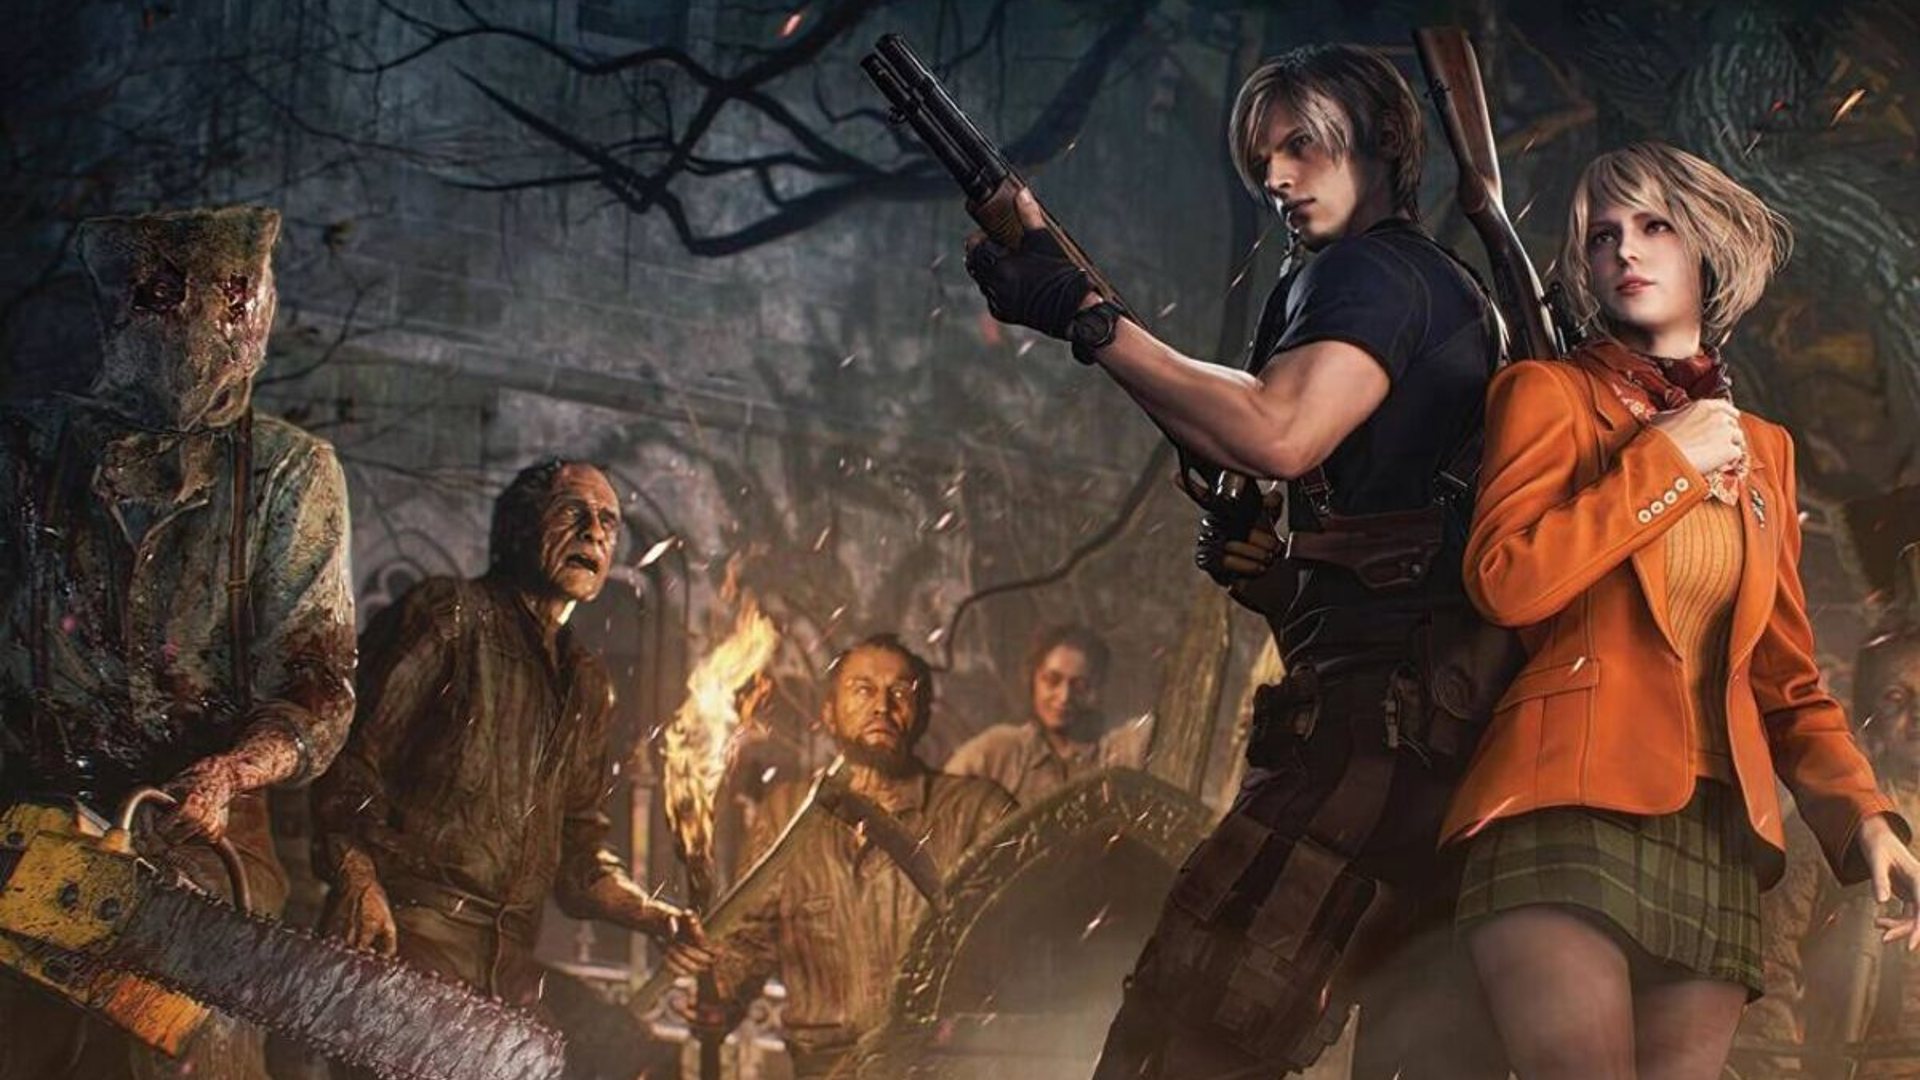 Best Games: Leon and Ashley can be seen with some zombies